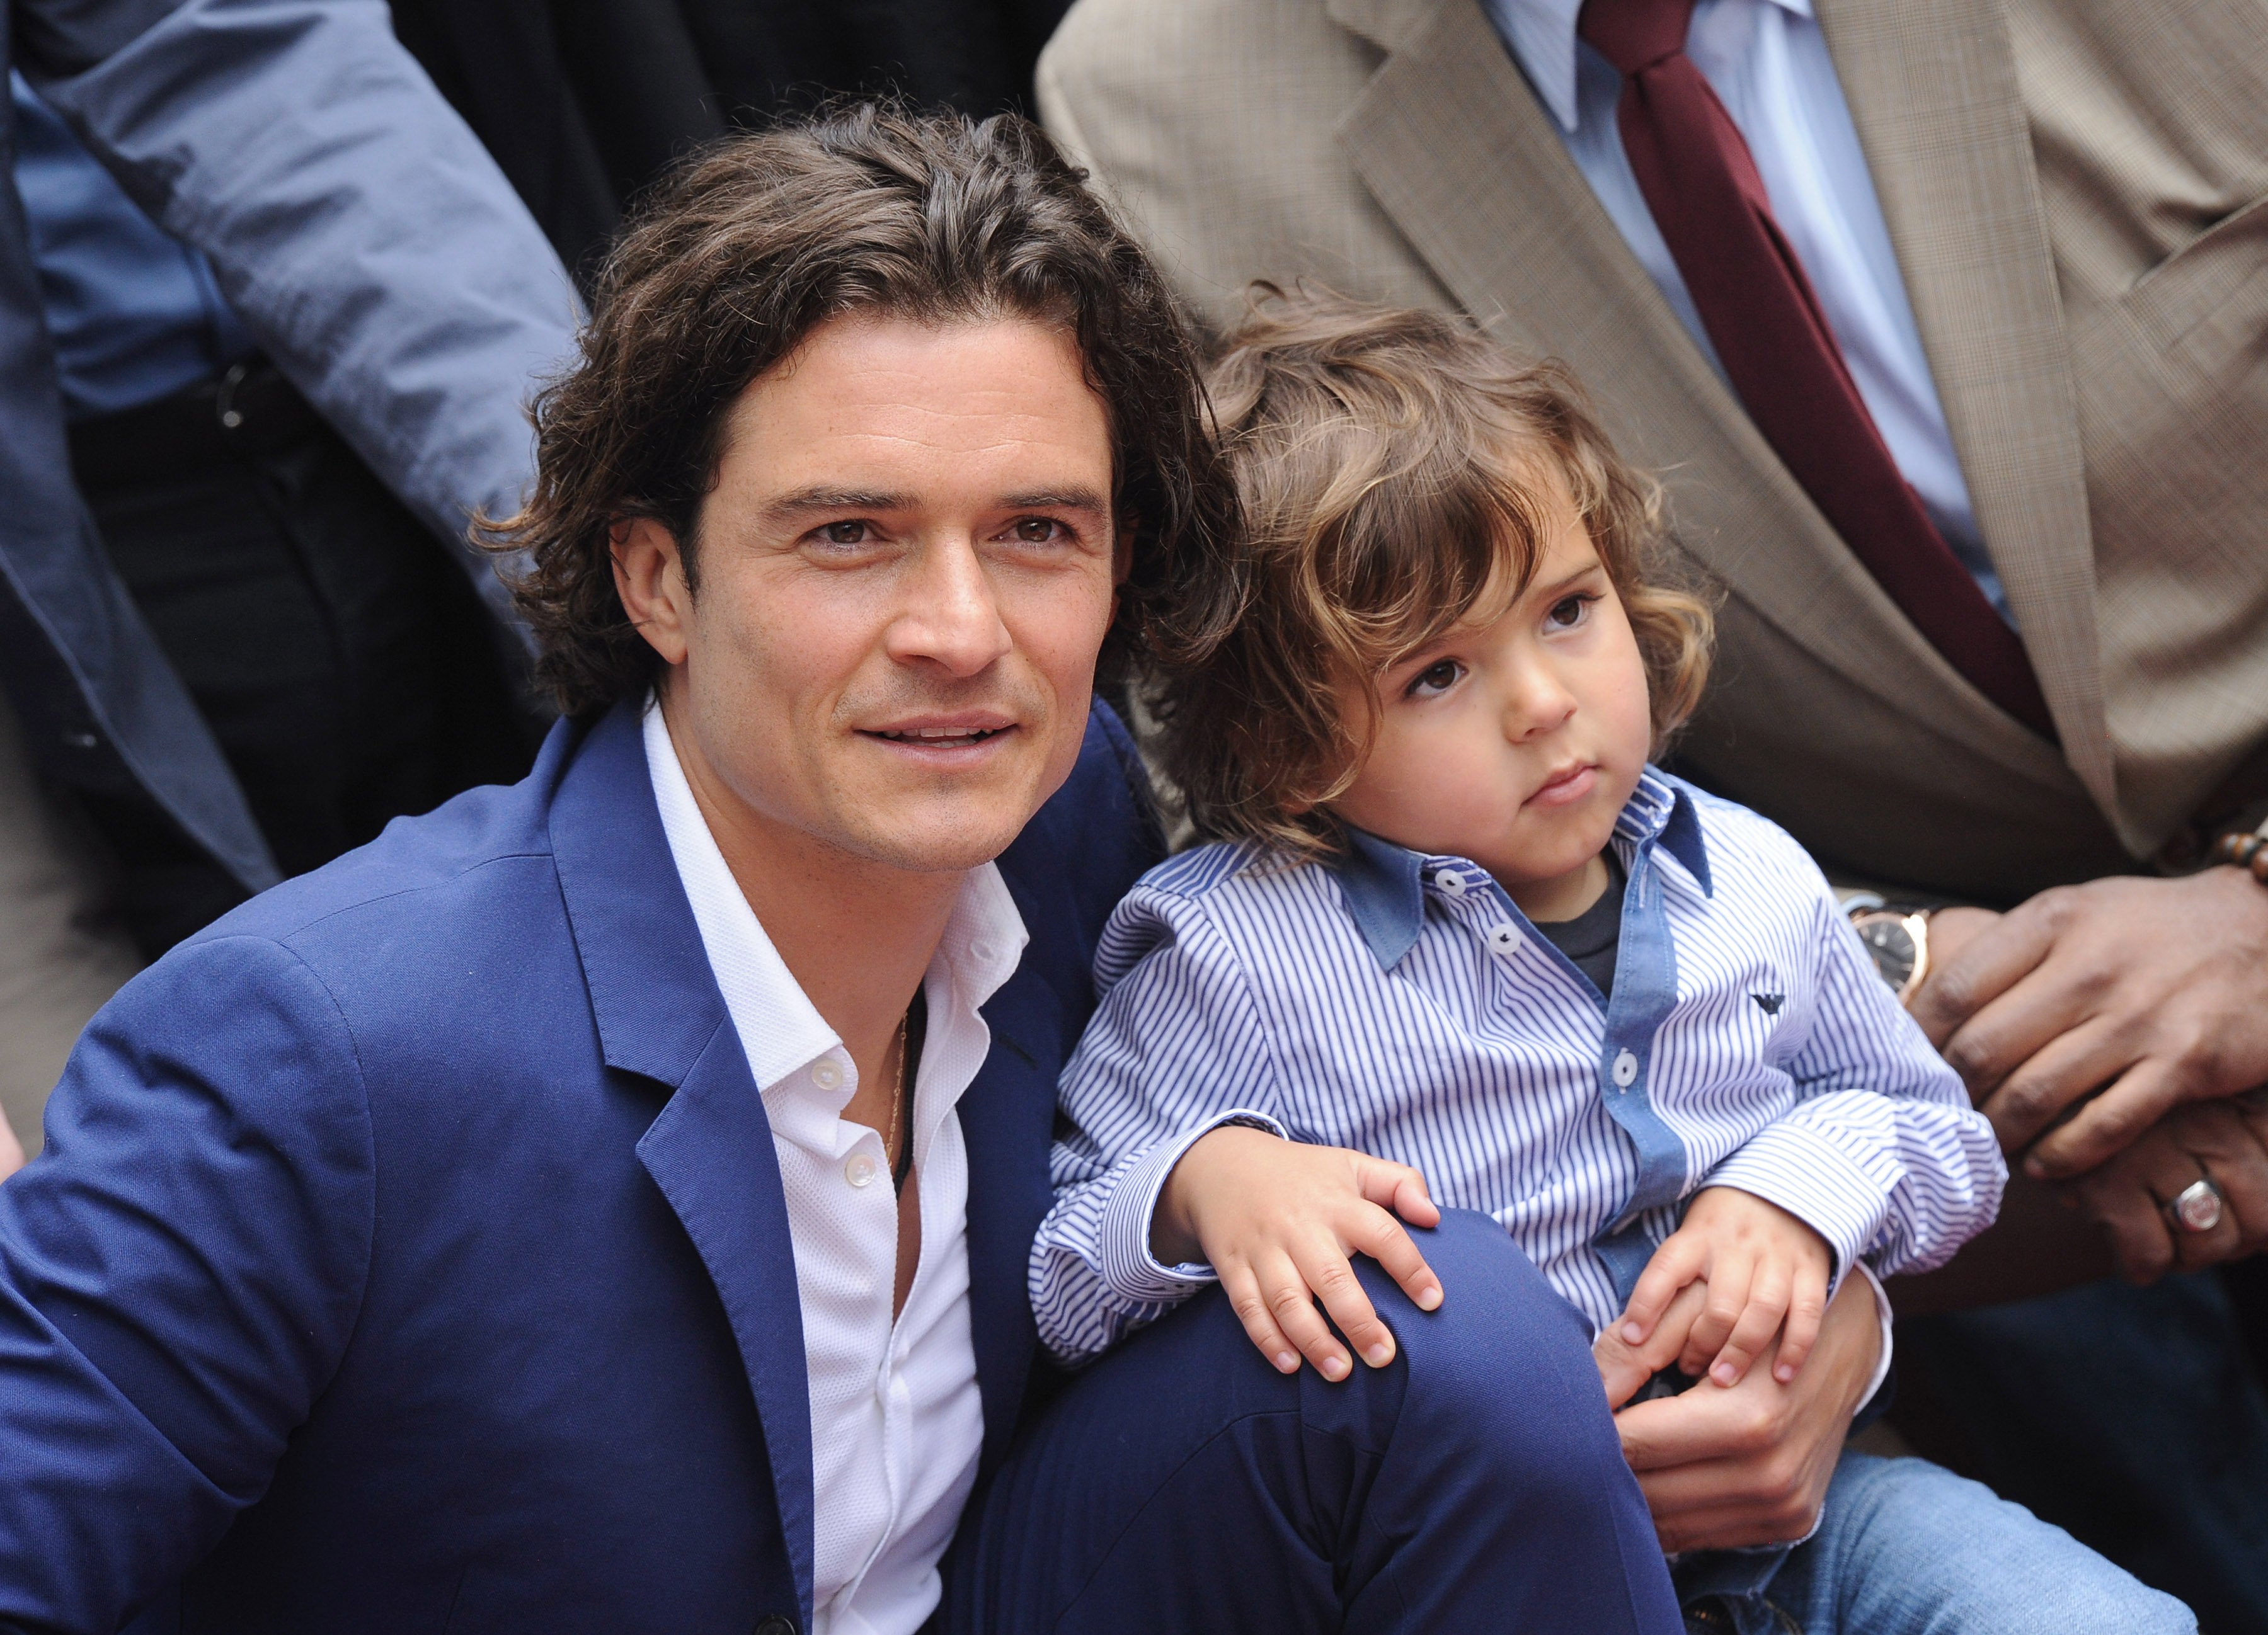 Orlando Bloom and his son Flynn attend Bloom's Hollywood Walk of Fame star honor event in California on April 2, 2014 | Photo: Getty Images